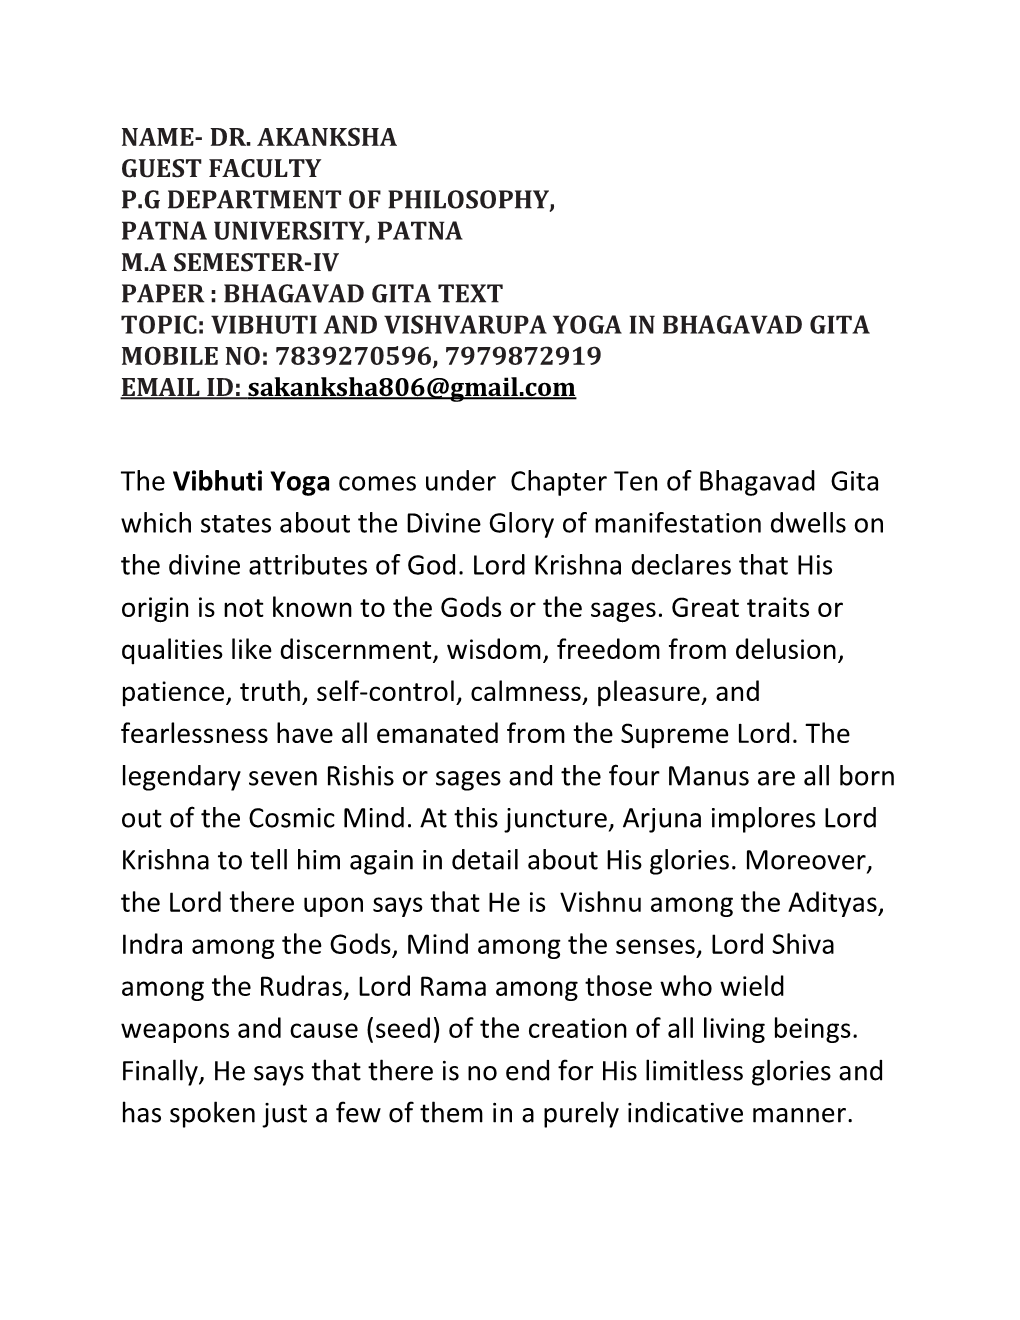 The Vibhuti Yoga Comes Under Chapter Ten of Bhagavad Gita Which States About the Divine Glory of Manifestation Dwells on the Divine Attributes of God